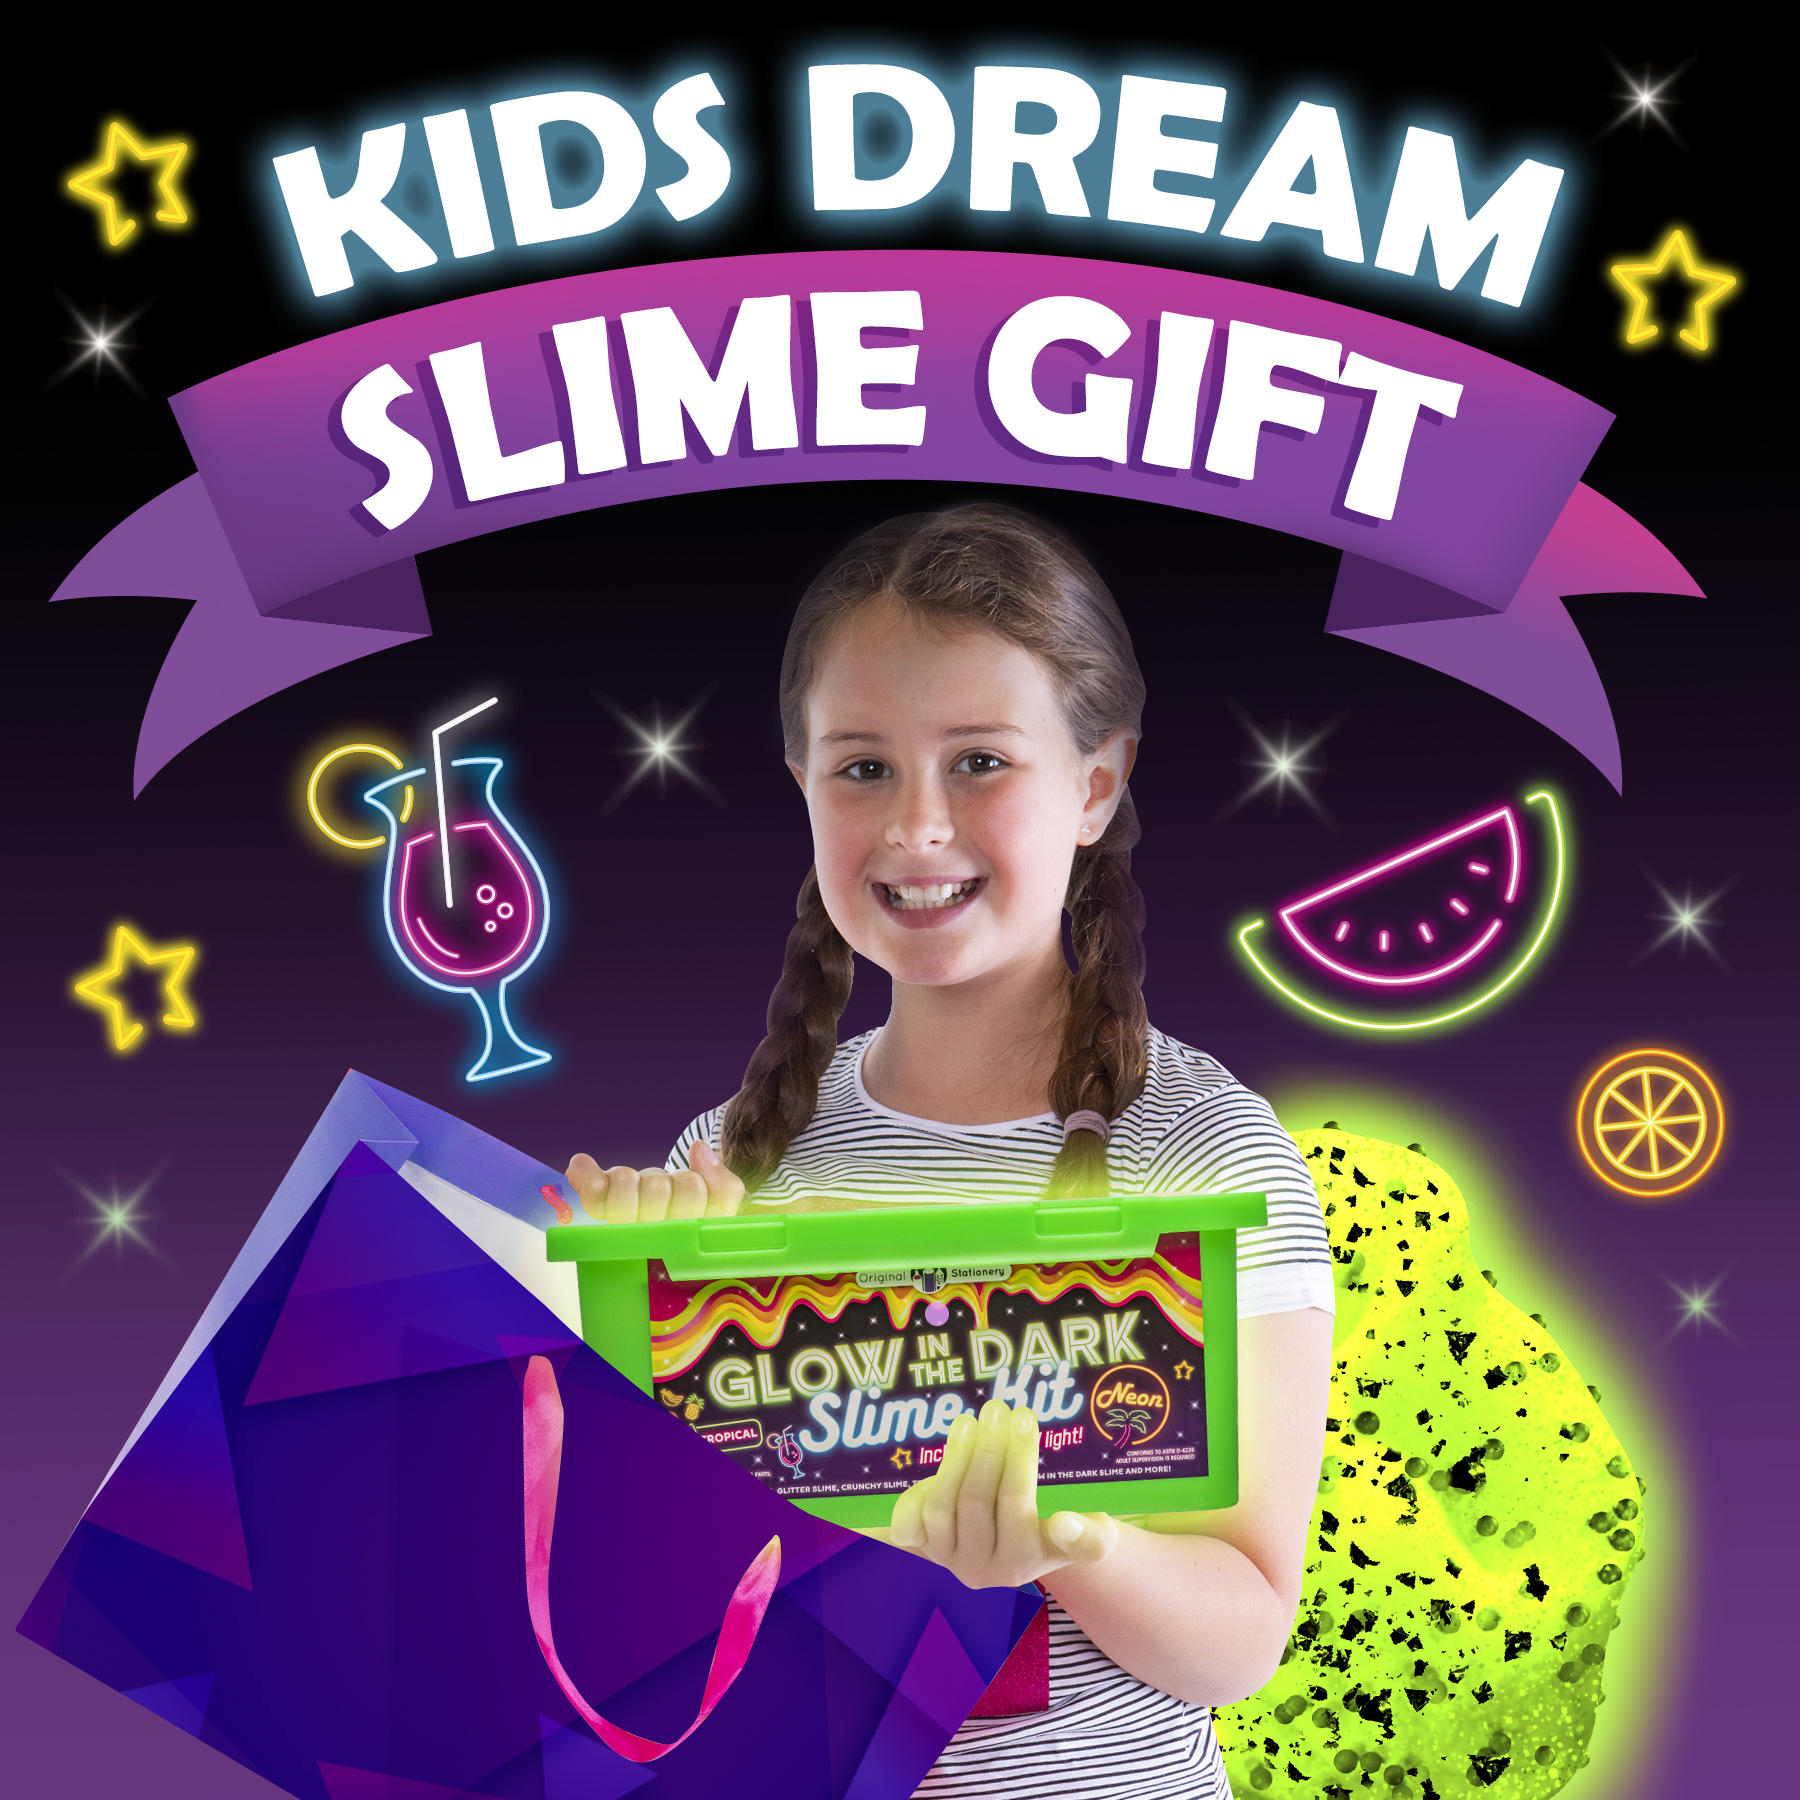 Original Stationery Glow in The Dark Slime Making Kit to Make Neon Crunchy Slime Floam and Jelly Cube Slime Great Slime Kits for Girls and Birthday Gift for 11 year old girl Glitter Add in’s 